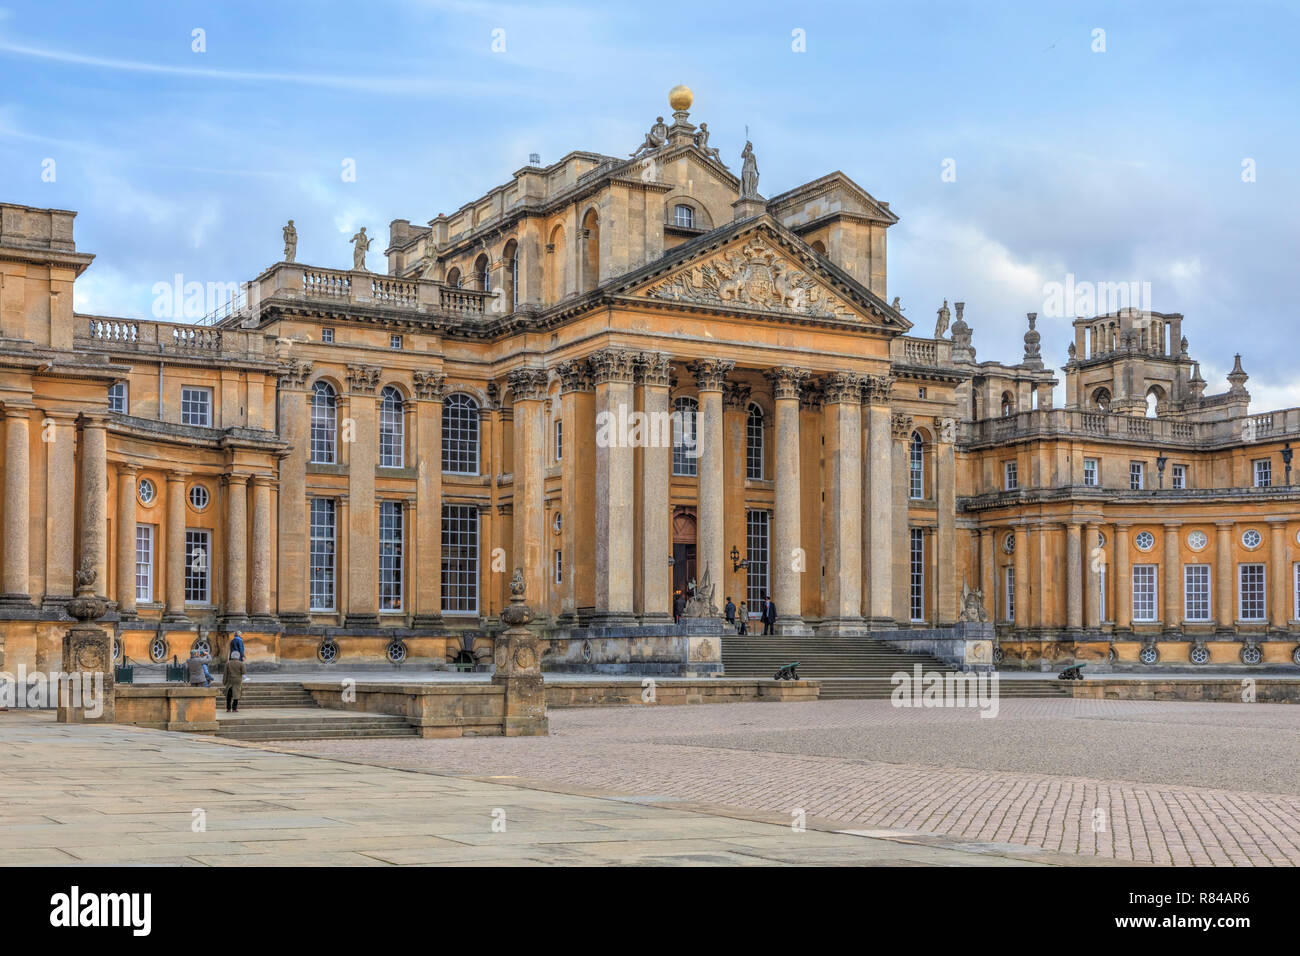 Blenheim Palace, Oxfordshire, Angleterre, Royaume-Uni, Europe Banque D'Images